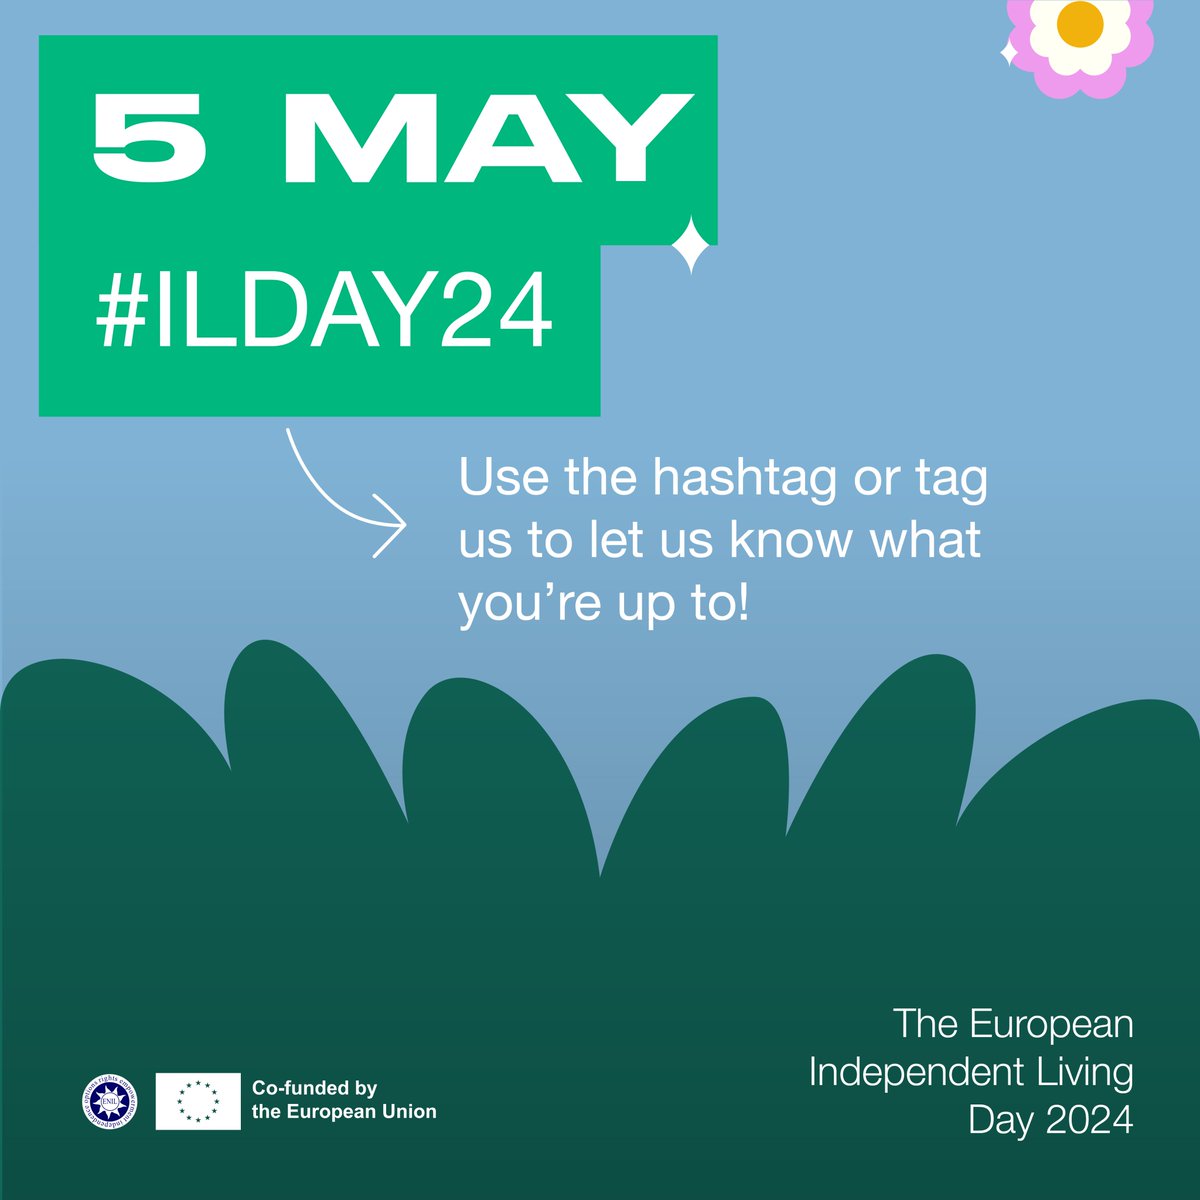 On May 5, we celebrate the #ILDAY24. This day is the opportunity to raise awareness, advocate for rights, and stand in solidarity with those facing barriers 🇪🇺 Please make sure to tag us and use the hashtag #ILDAY24 so we can interact with your content! #IndependentLiving